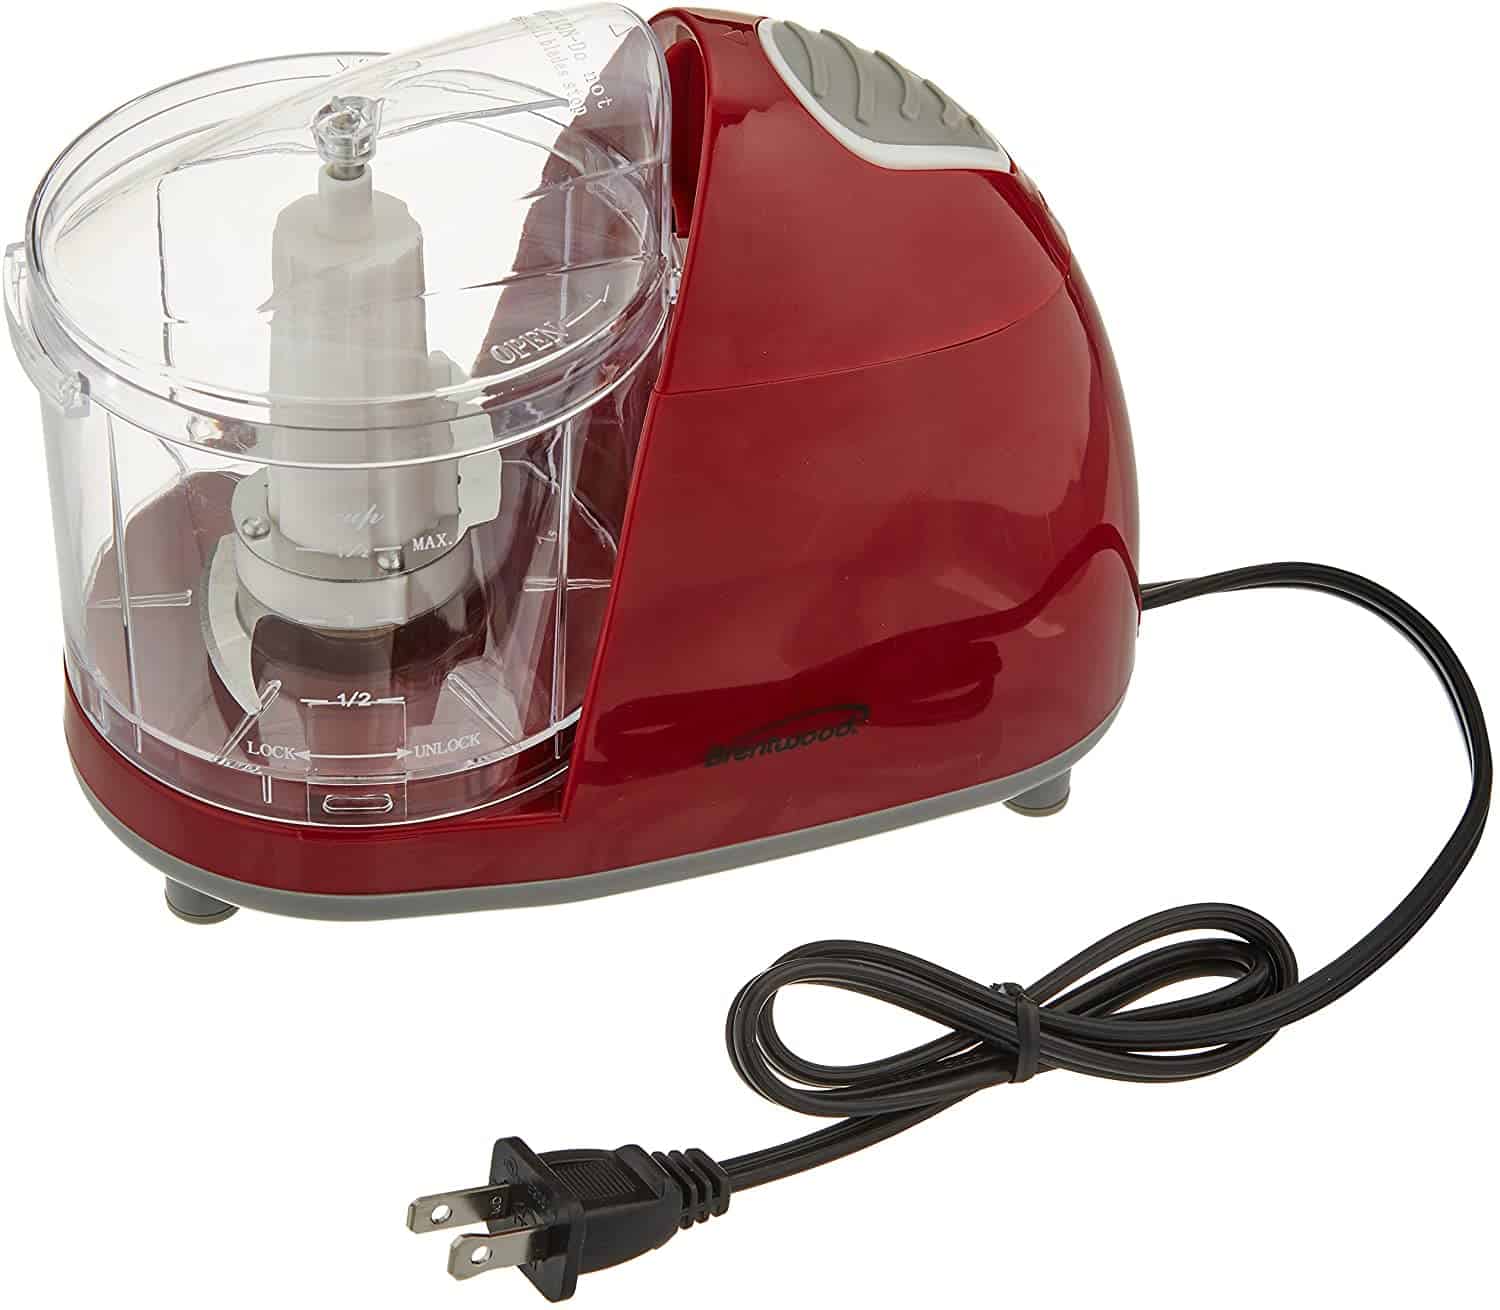 Brentwood MC-105 Red Mini Food Chopper Review